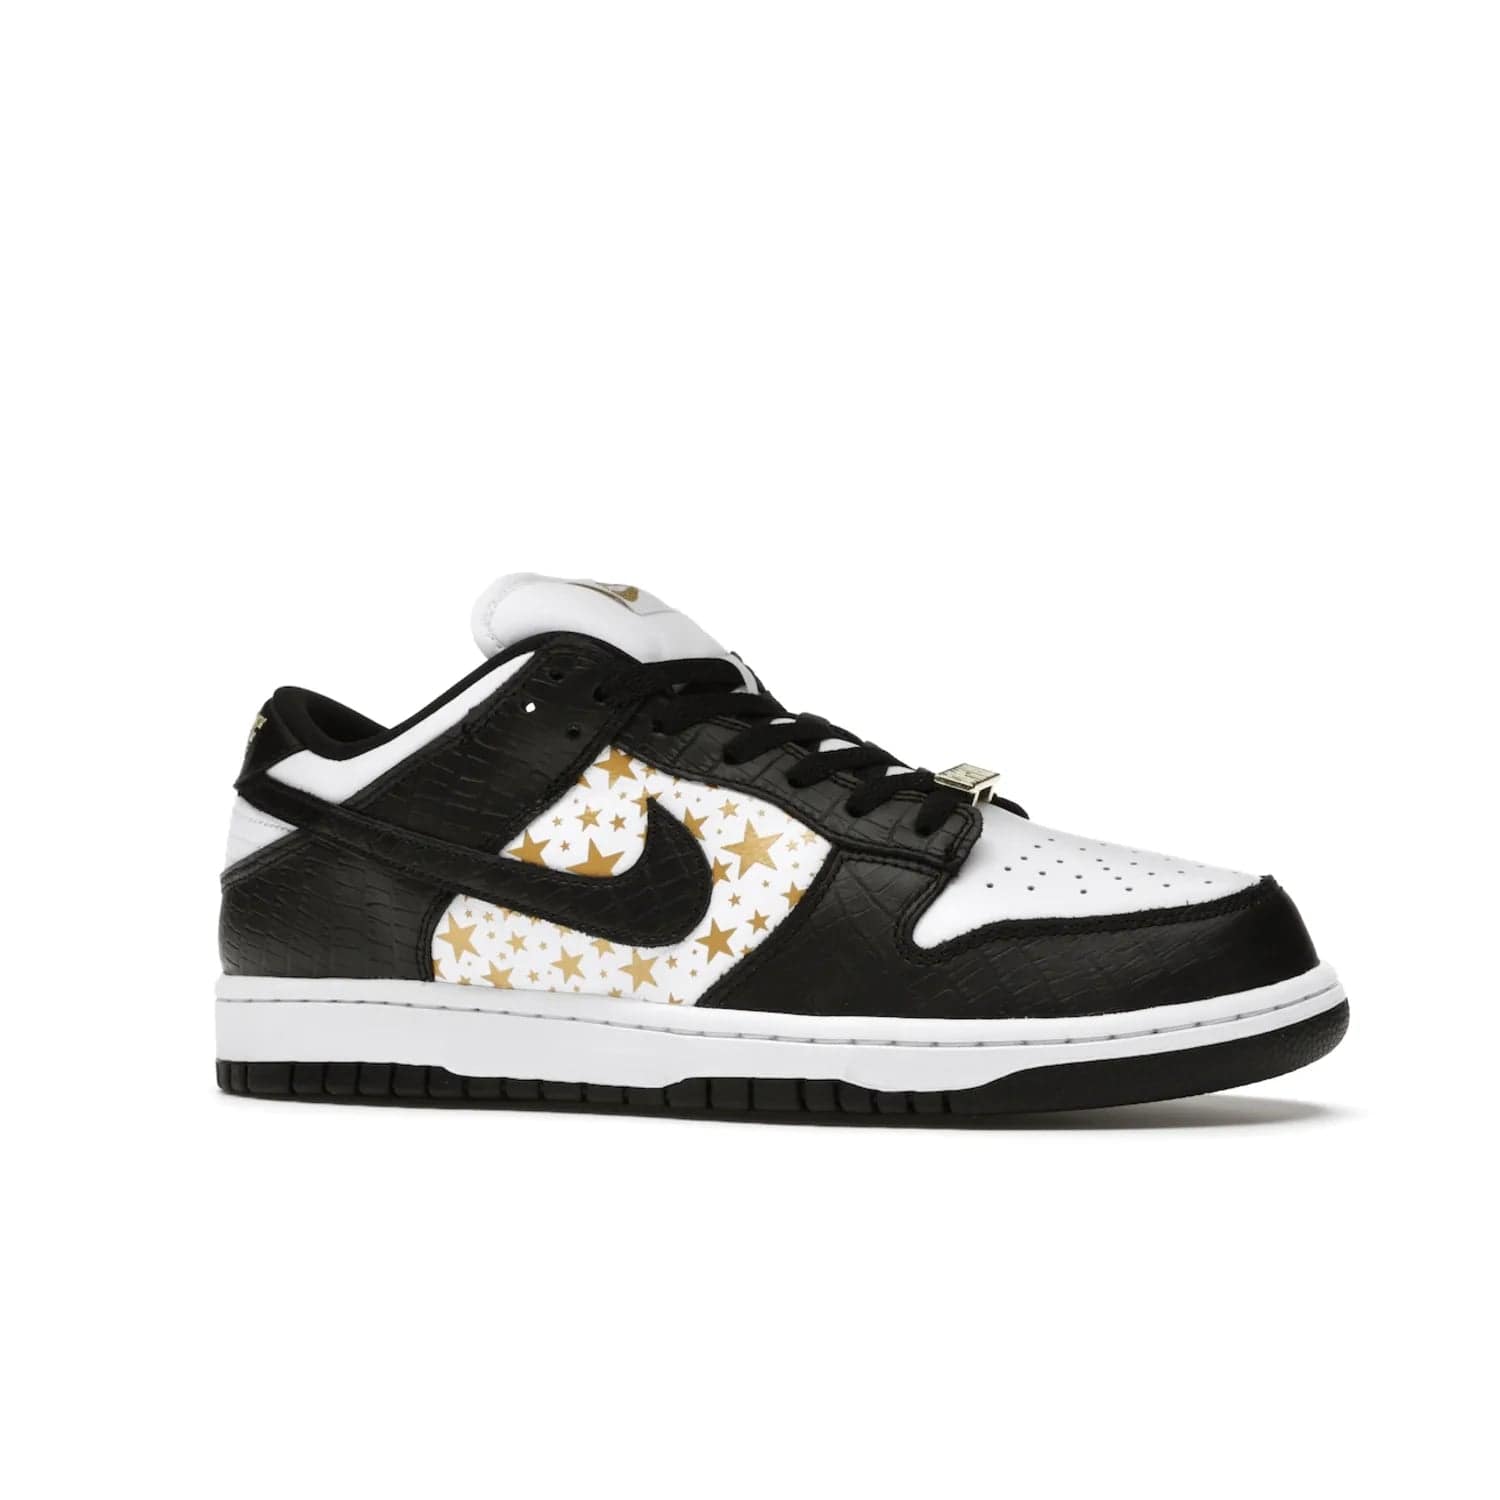 Nike SB Dunk Low Supreme Stars Black (2021) - Image 3 - Only at www.BallersClubKickz.com - Retro style and signature details make the Nike SB Dunk Low Supreme Black a must-have. This special edition shoe features a white leather upper and black croc skin overlays complemented by gold stars and deubré. Enjoy a piece of SB history and grab yours today.